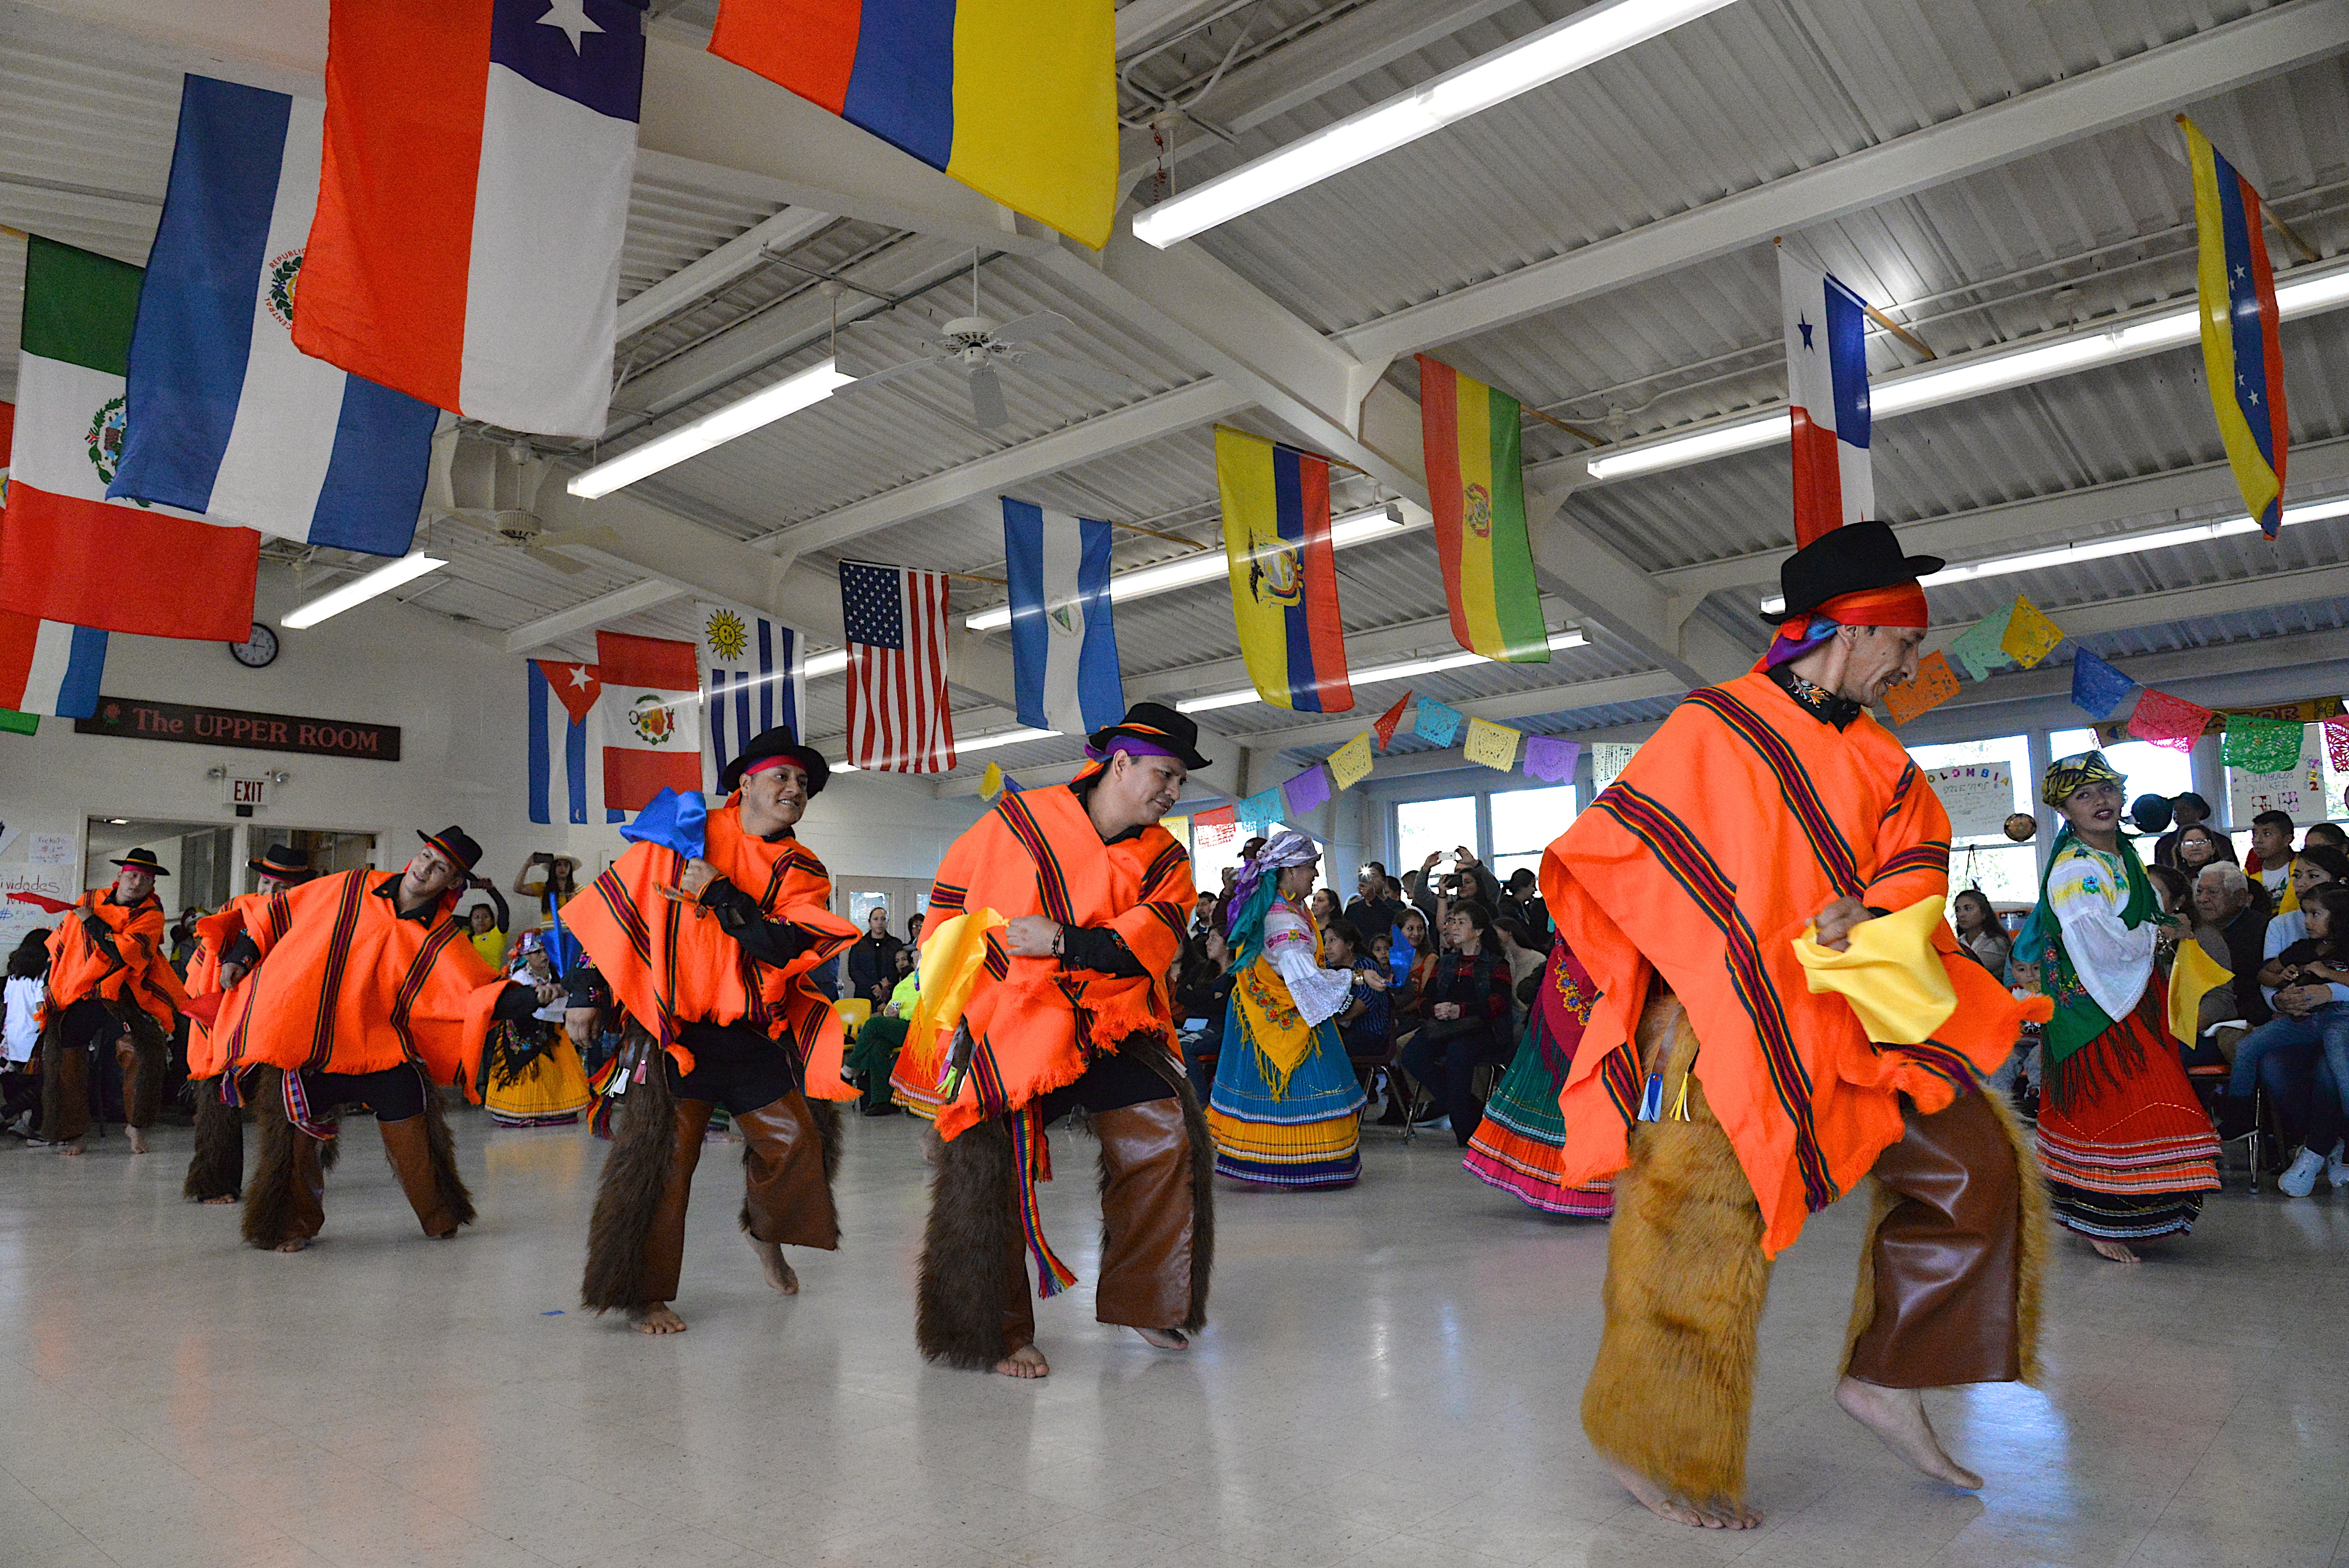 St. Therese Of Lisieux Church in Montauk hosted an International Cultural Festival on Sunday, with food, costumes and dances from Latin American nations. KYRIL BROMLEY 